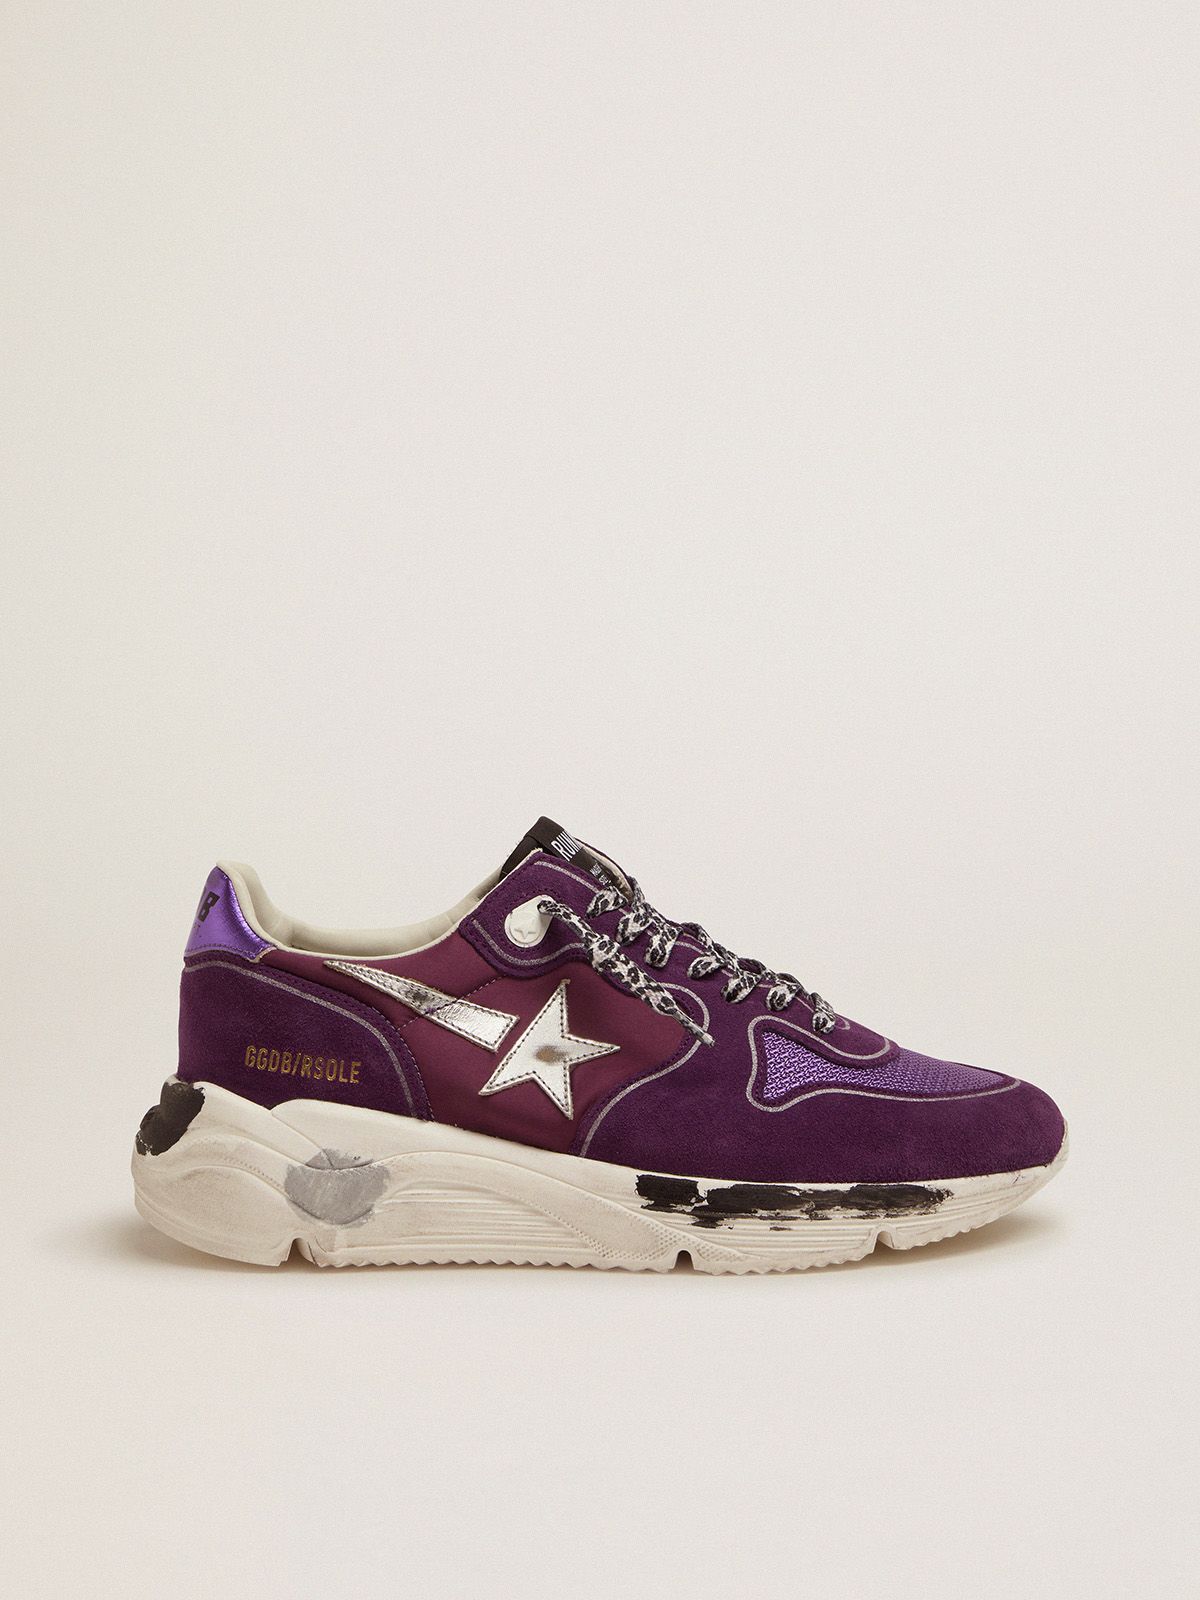 golden goose with mesh leather and tab Suede, metallic Running sneakers heel purple Sole